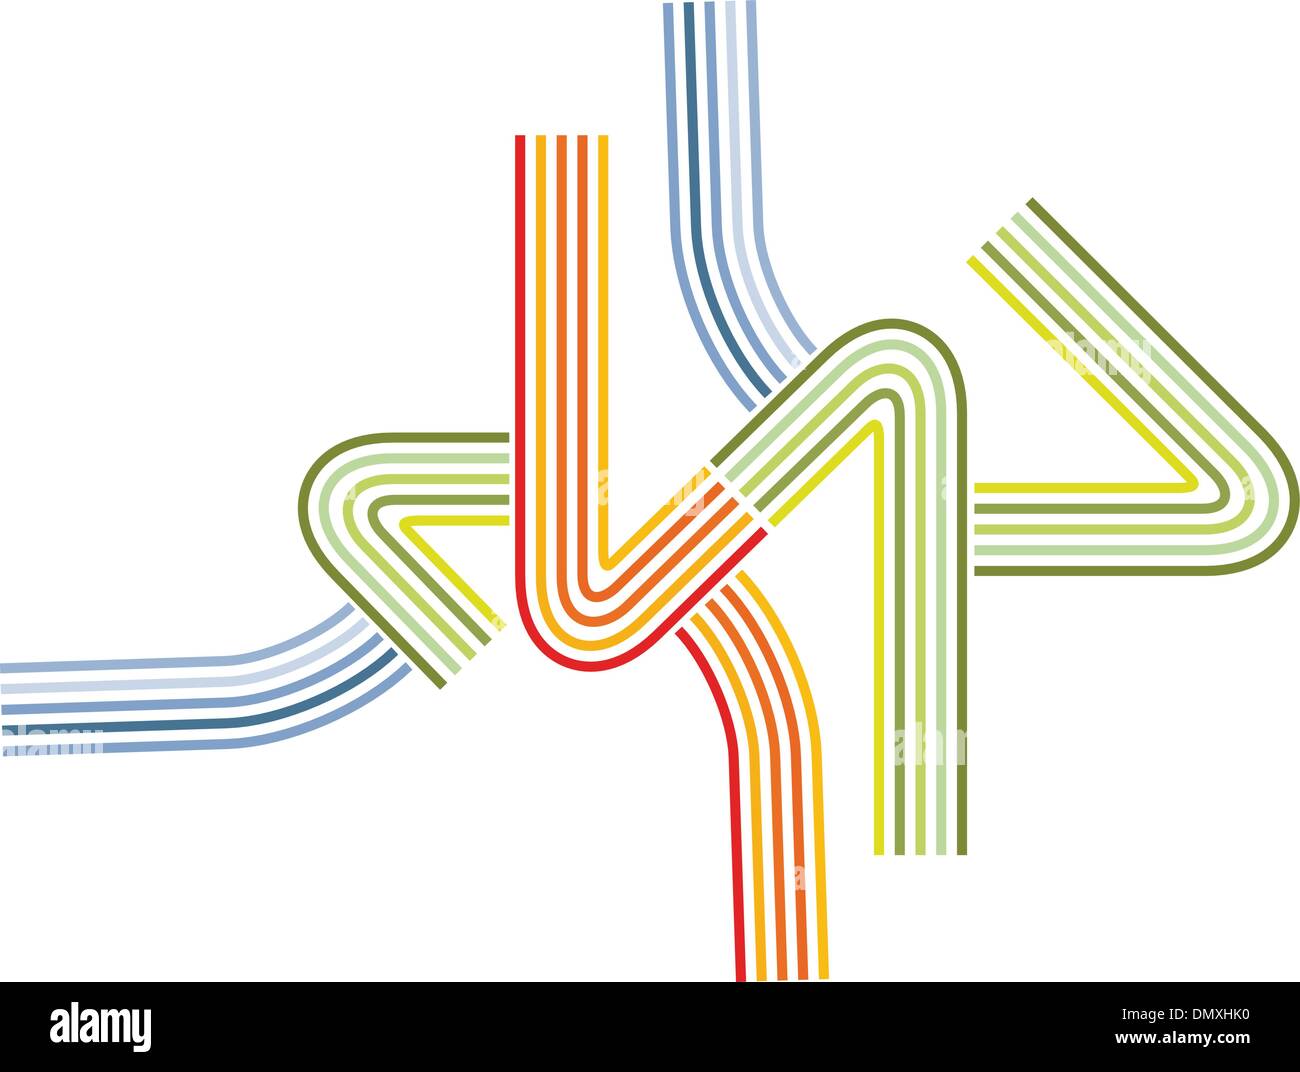 Abstraction Stock Vector